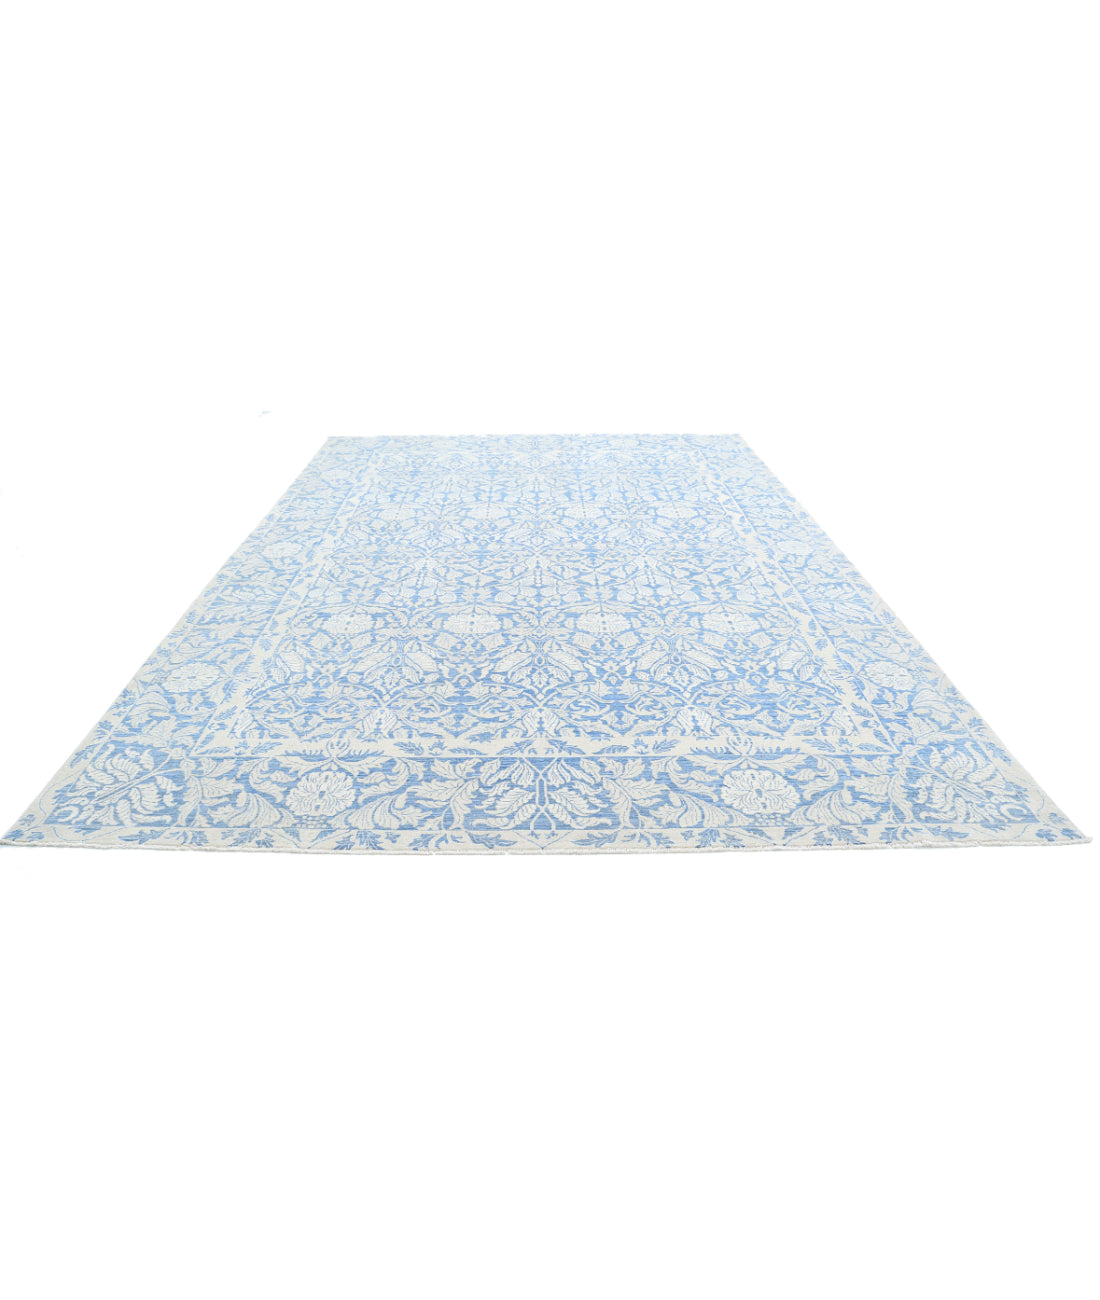 Serenity 9'9'' X 13'10'' Hand-Knotted Wool Rug 9'9'' x 13'10'' (293 X 415) / Ivory / Blue